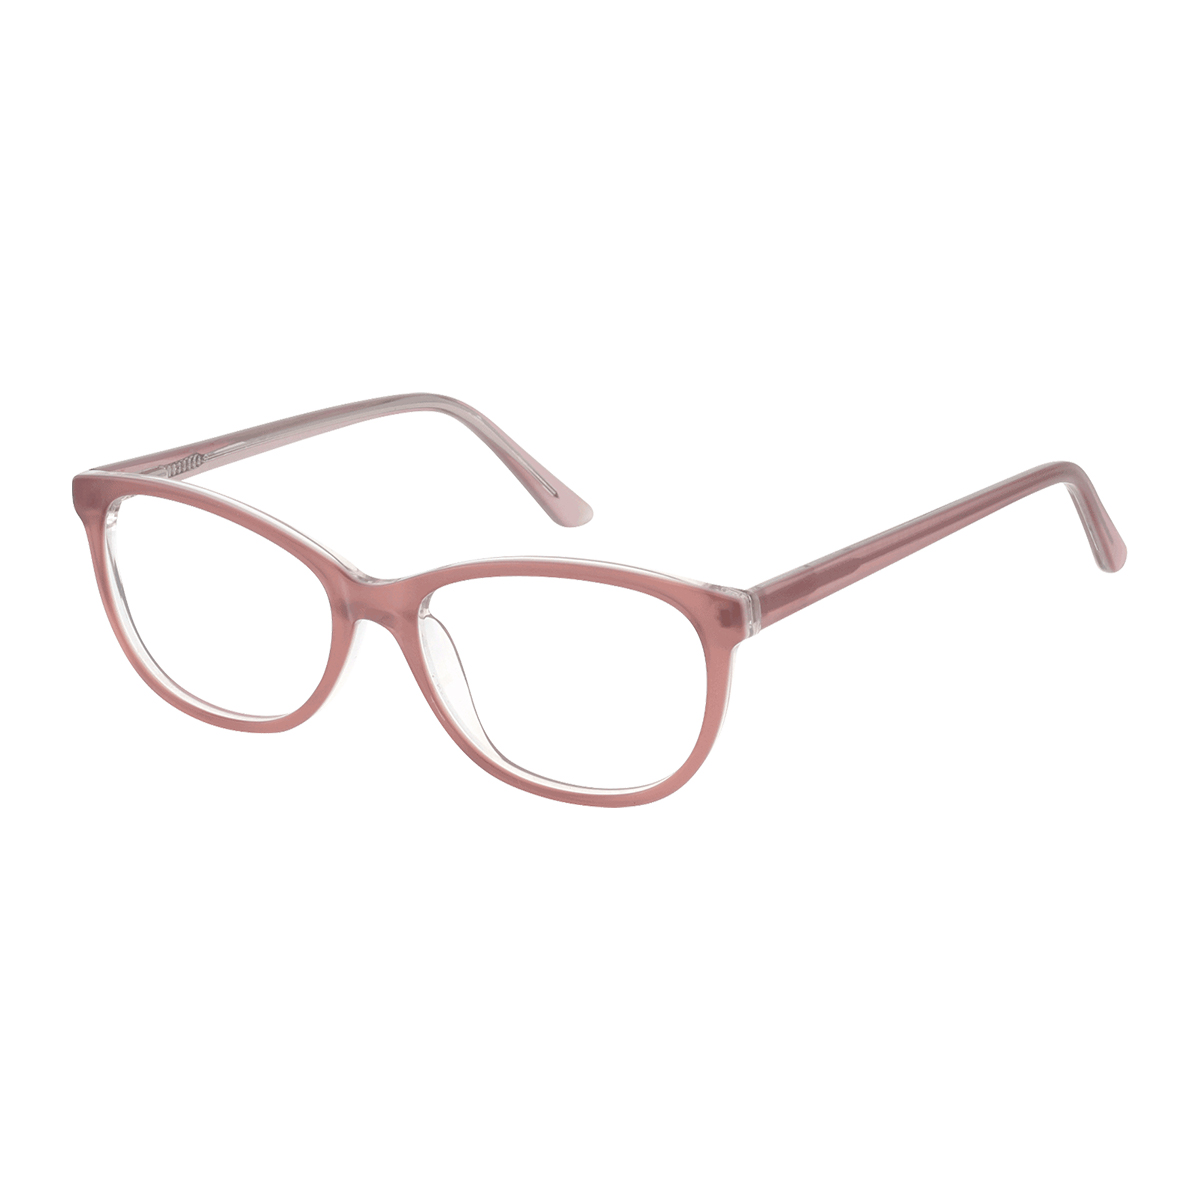 May - Oval Transparent-Pink Reading Glasses for Women